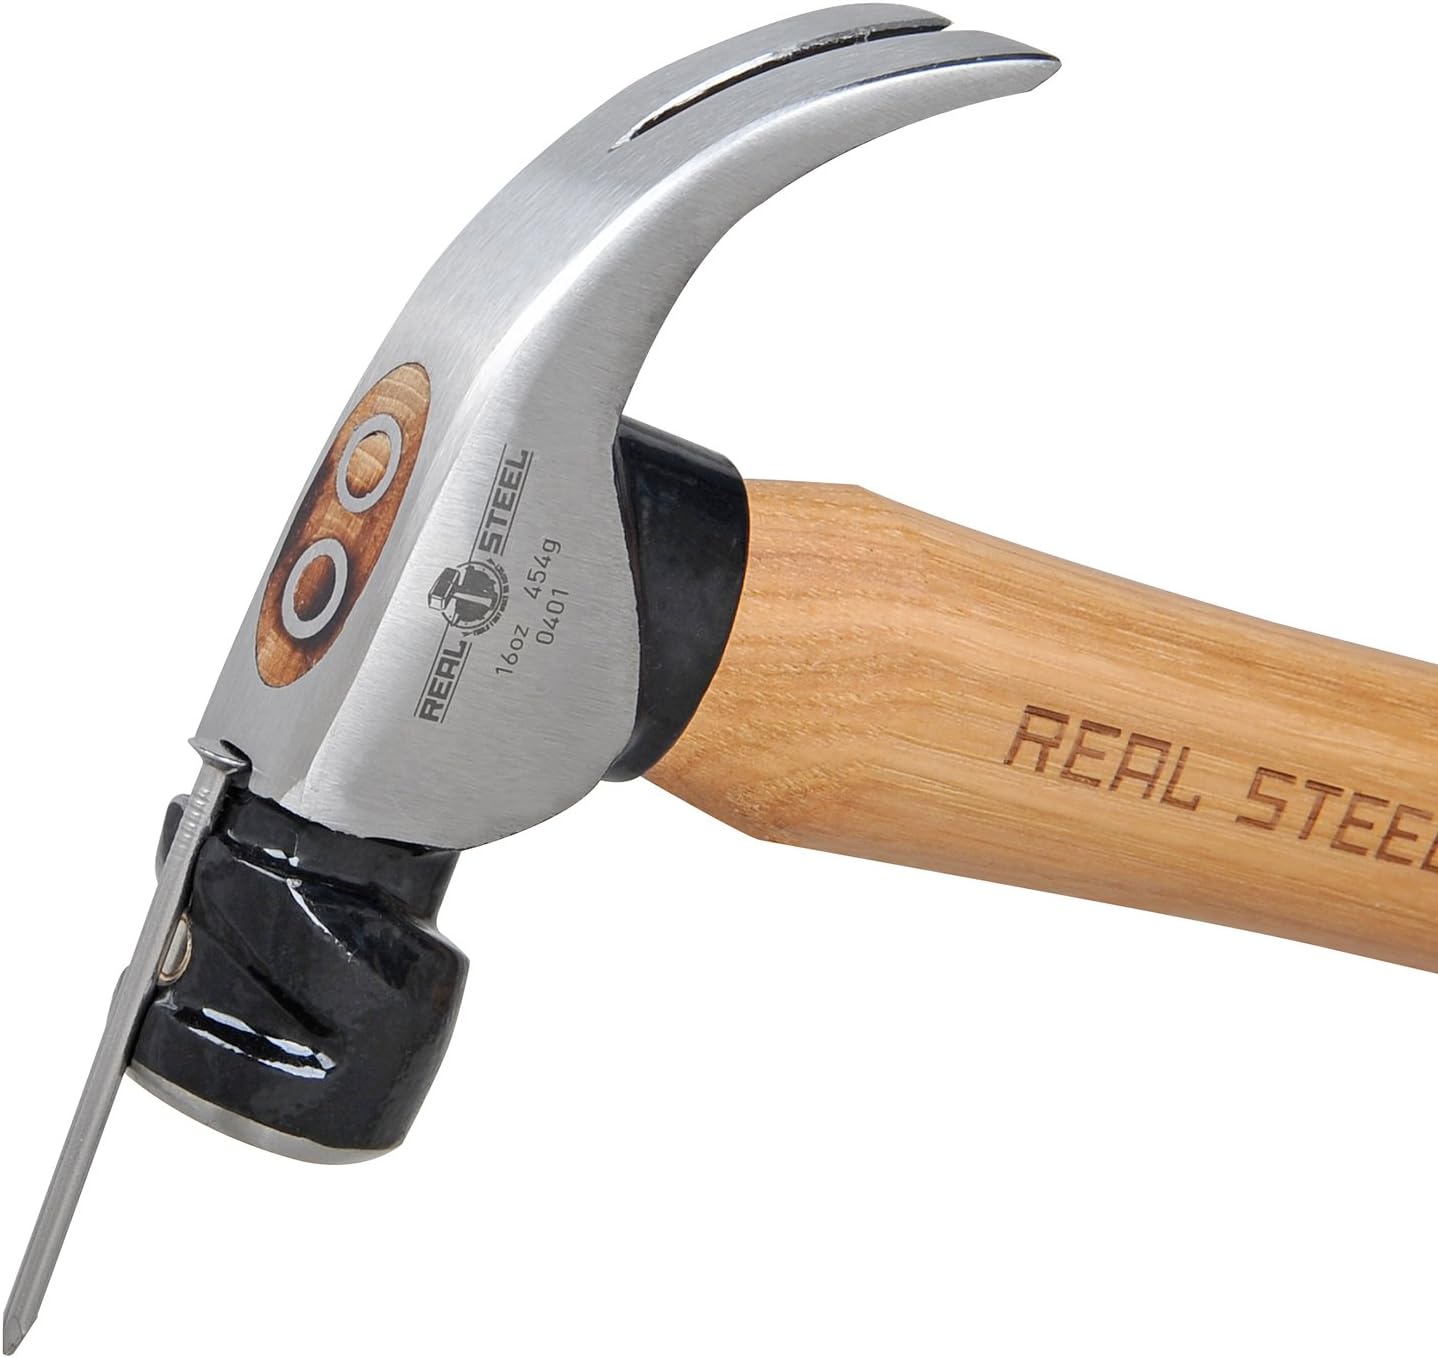 Real Steel Hammer Claw Curved 450g 16oz Hick. Wood Handle RSH0401 Power Tool Services